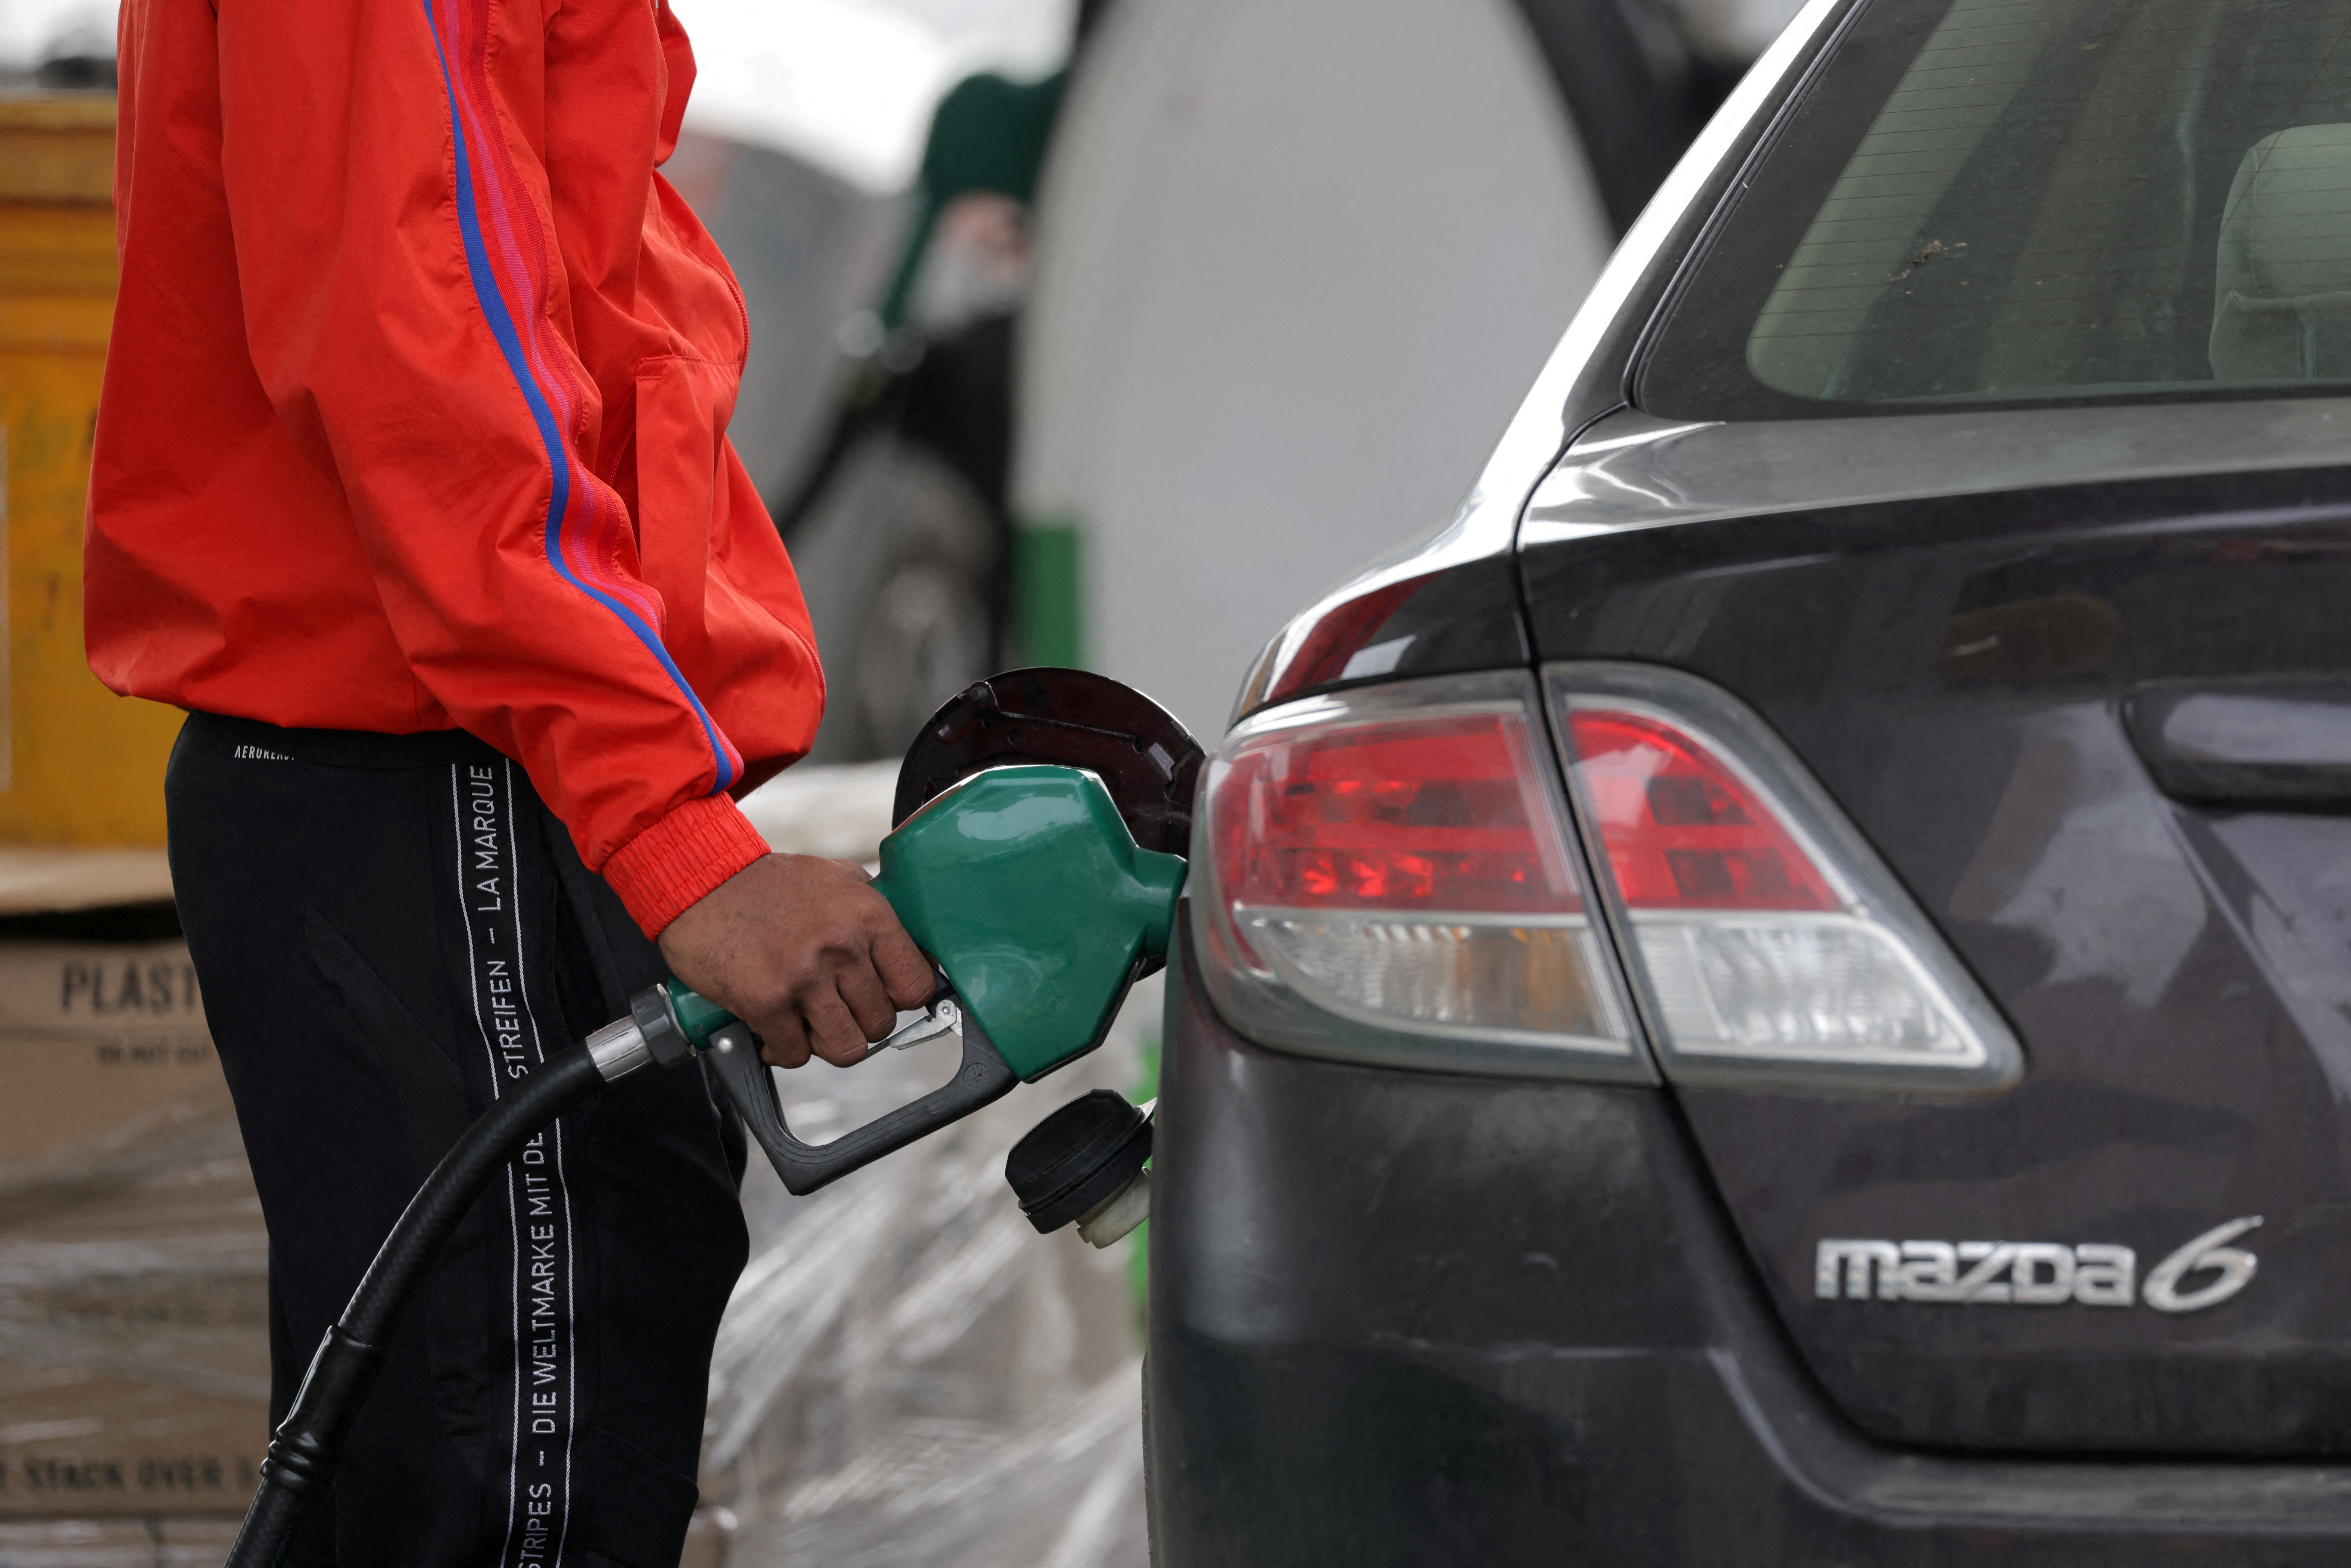 A person uses a petrol pump at a gas station as fuel prices surged in Manhattan, New York City